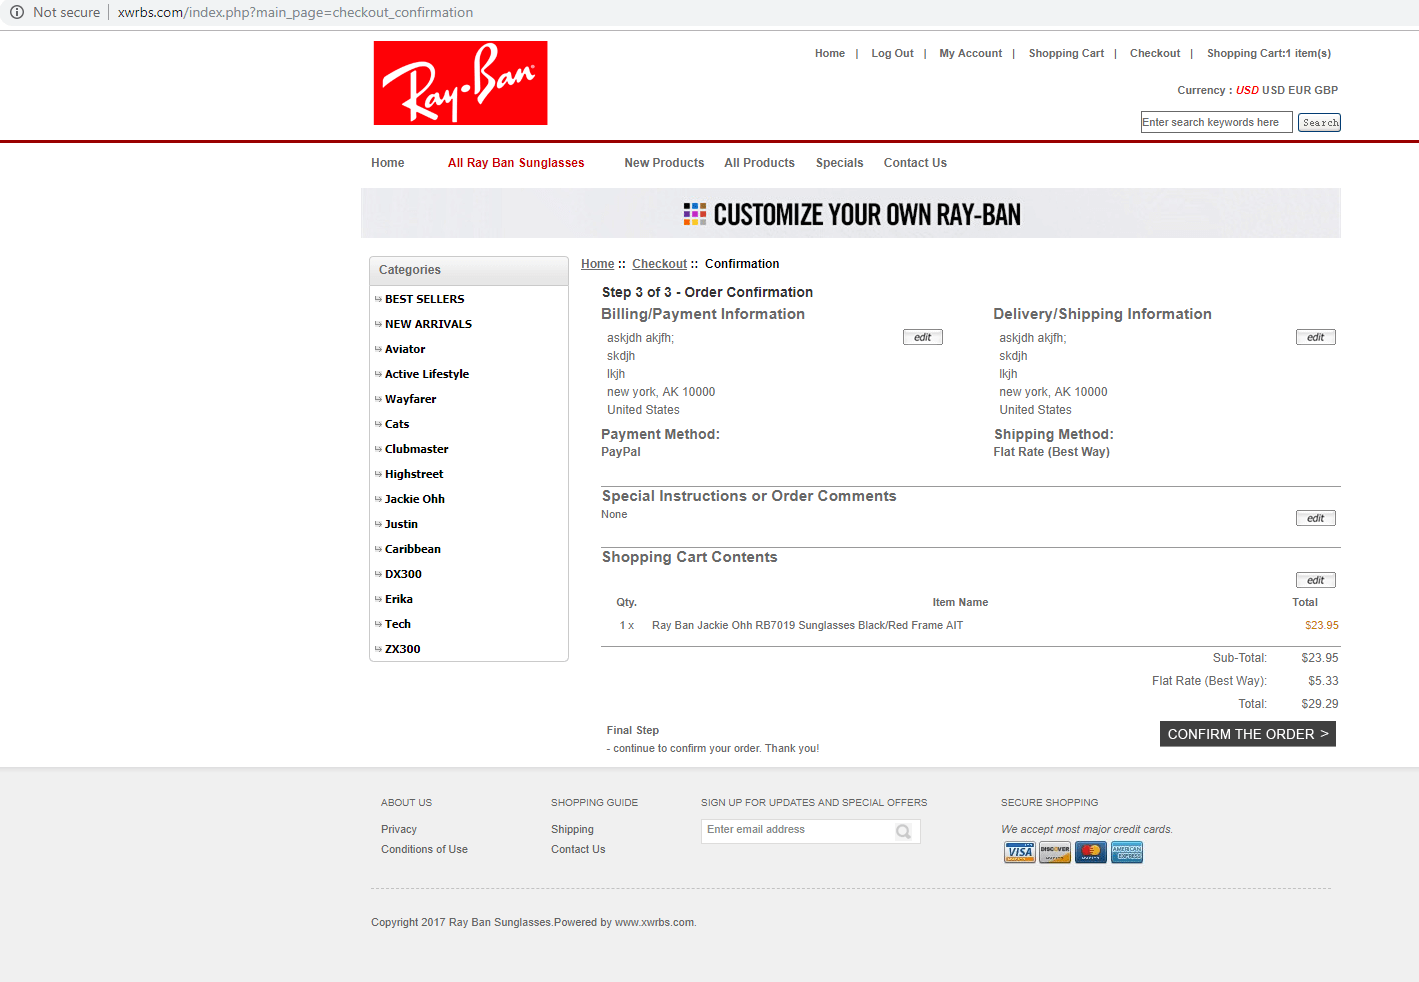 ray ban order number